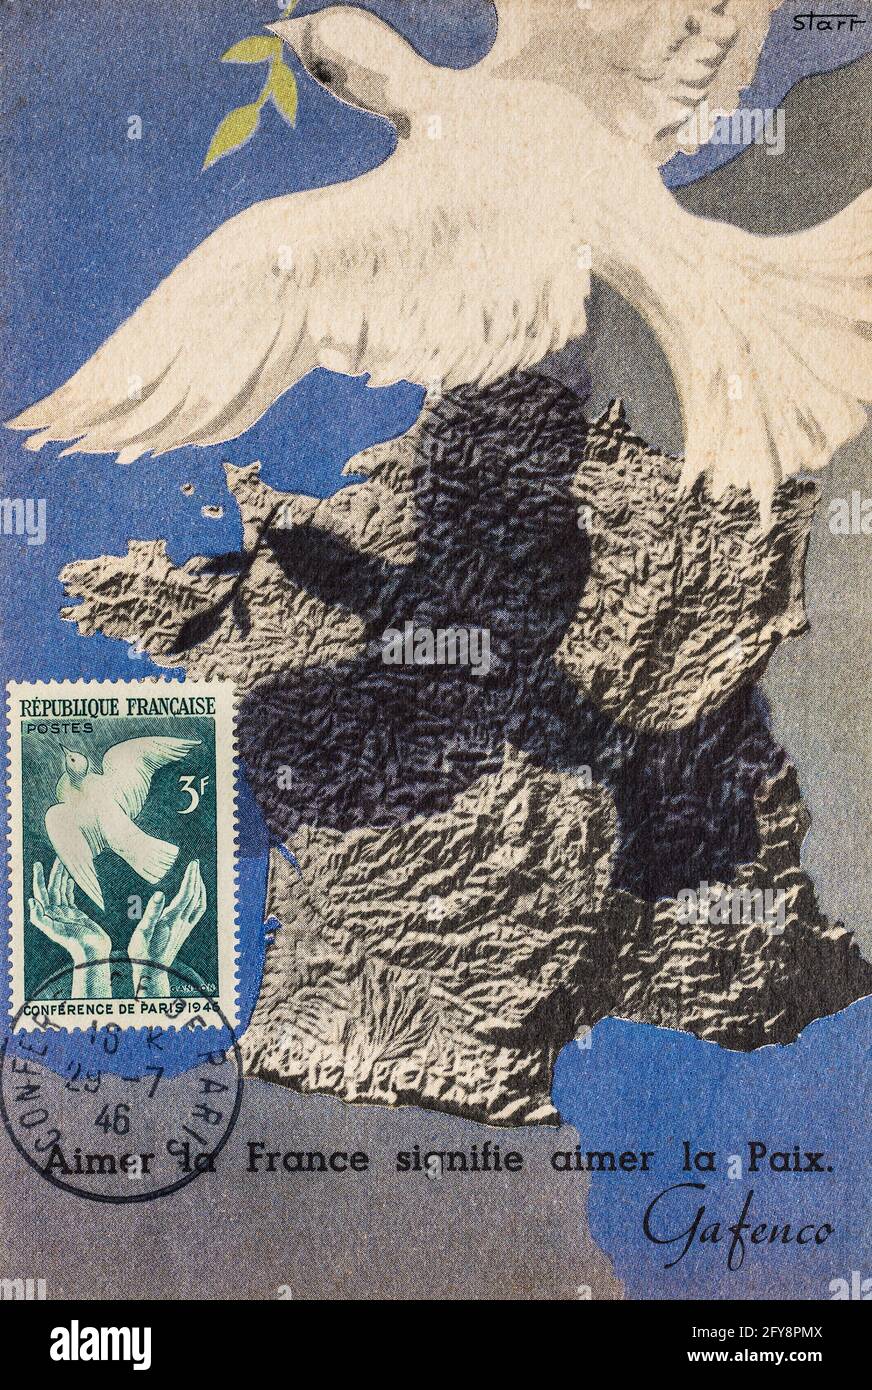 'Maximum card' postcard depicting a white dove, mapped outline of France and postage stamp celebrating the 1946 Paris Peace Conference. Stock Photo